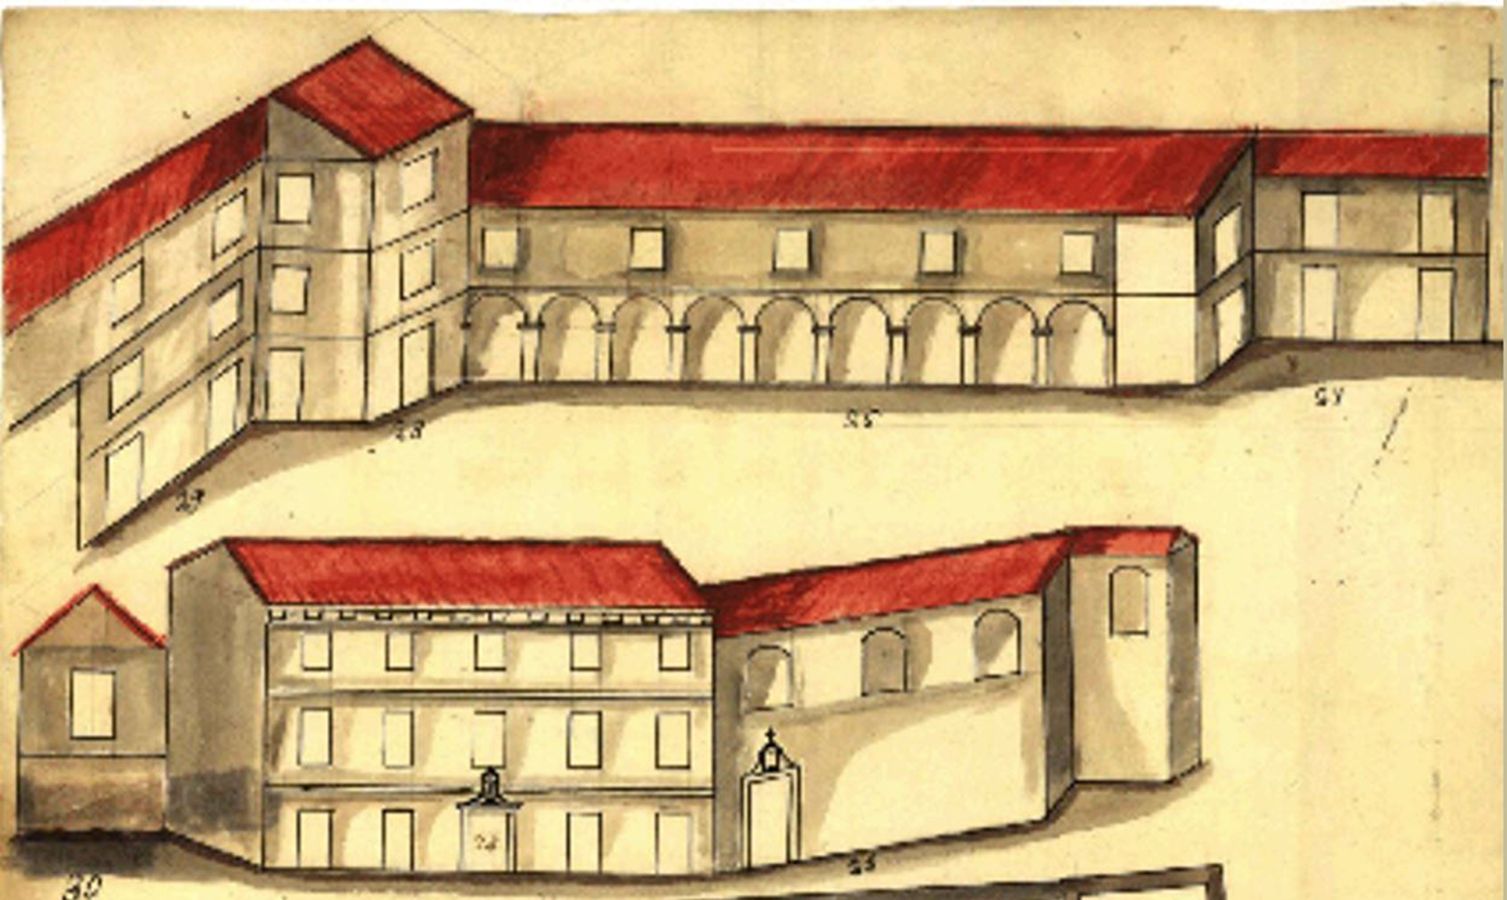 State Archives of Cagliari - church and convent of the nuns, 1821